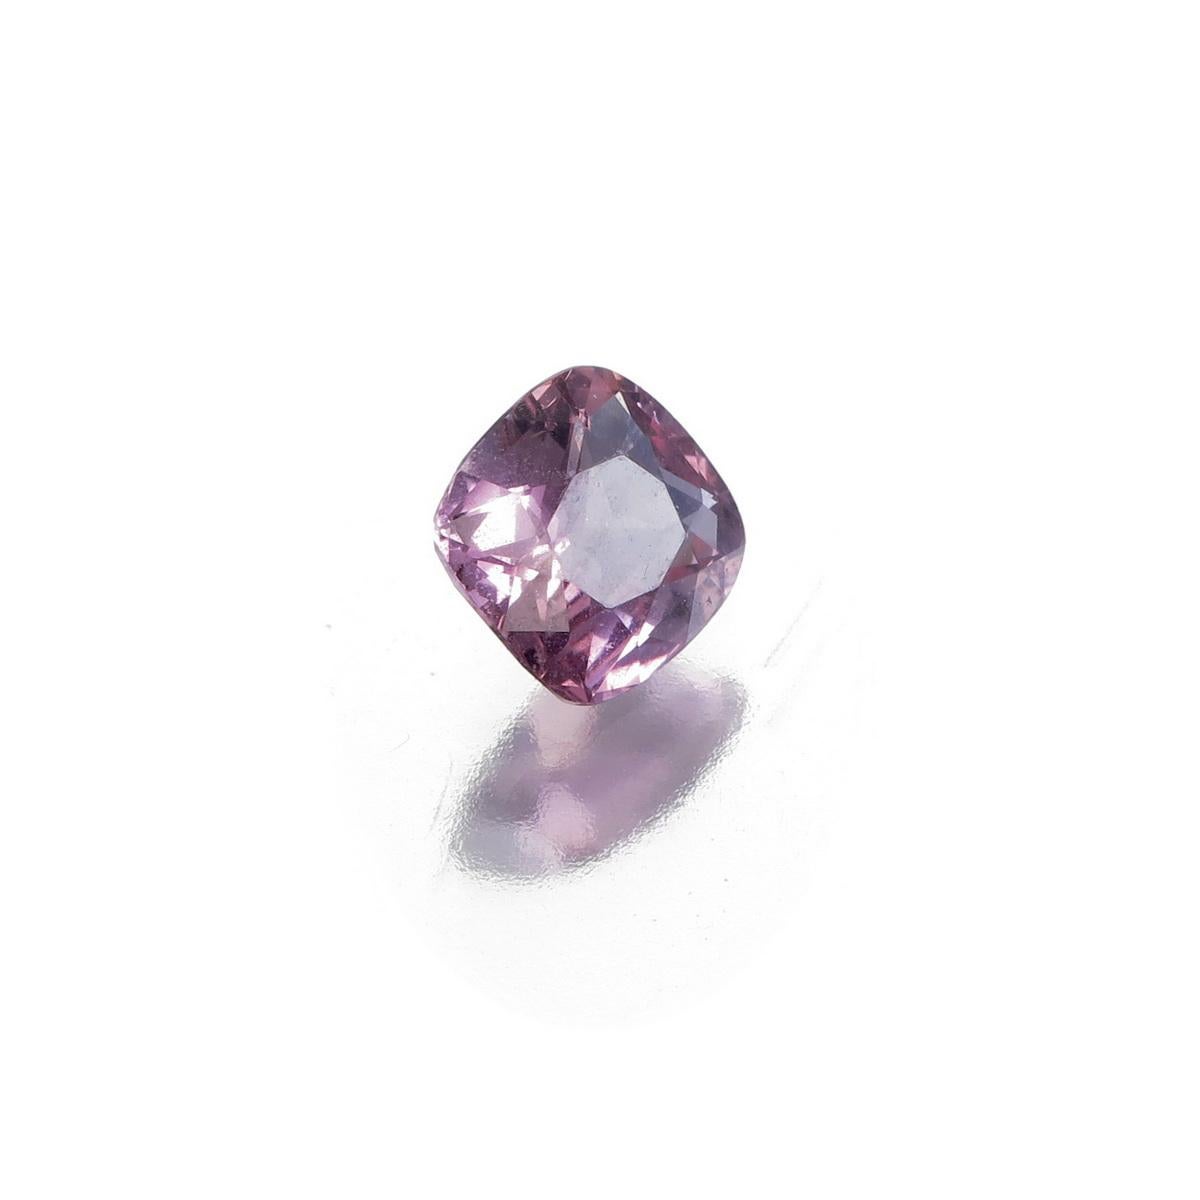 1.06 Carat Natural Pink Spinel from Burma  
Dimension: 6.21 x 6.08 x 3.36mm
Shape: Cushion Cut
Weight: 1.06 Carat
No Heat
GIL Certified Report No: STO2022102151318